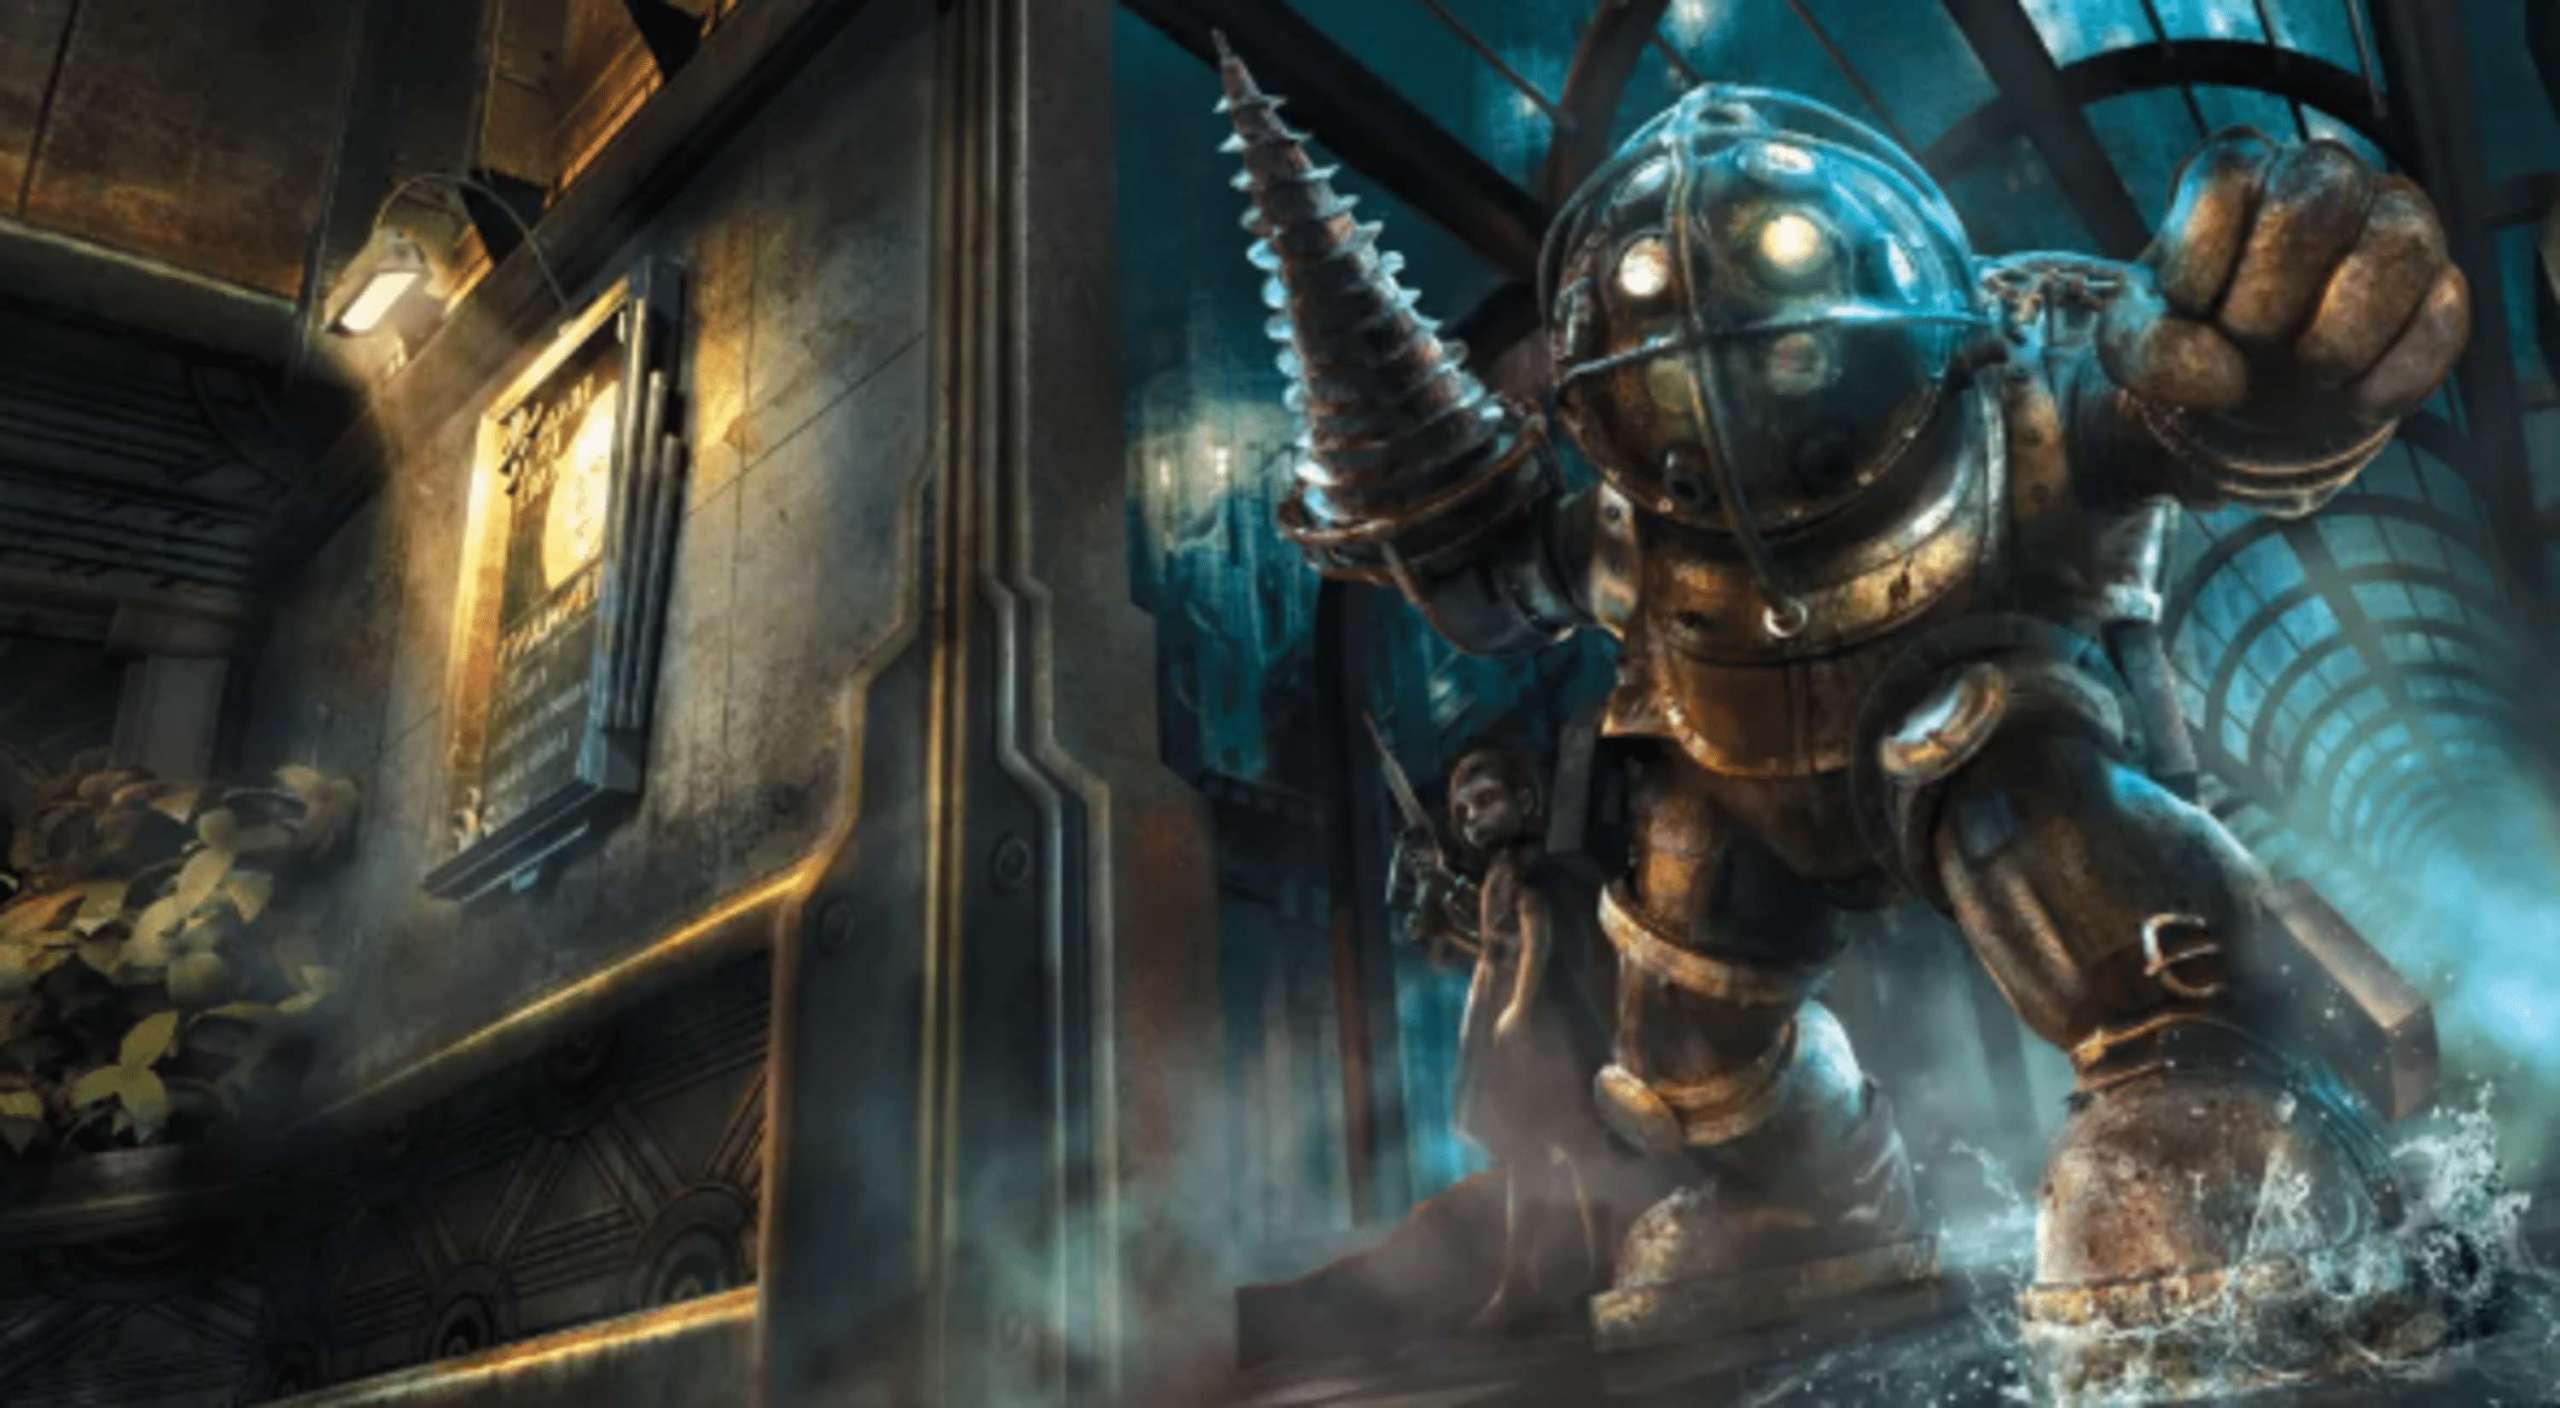 Currently Being Developed Is A Fourth BioShock Game, And A New Leak Is Providing Information About It